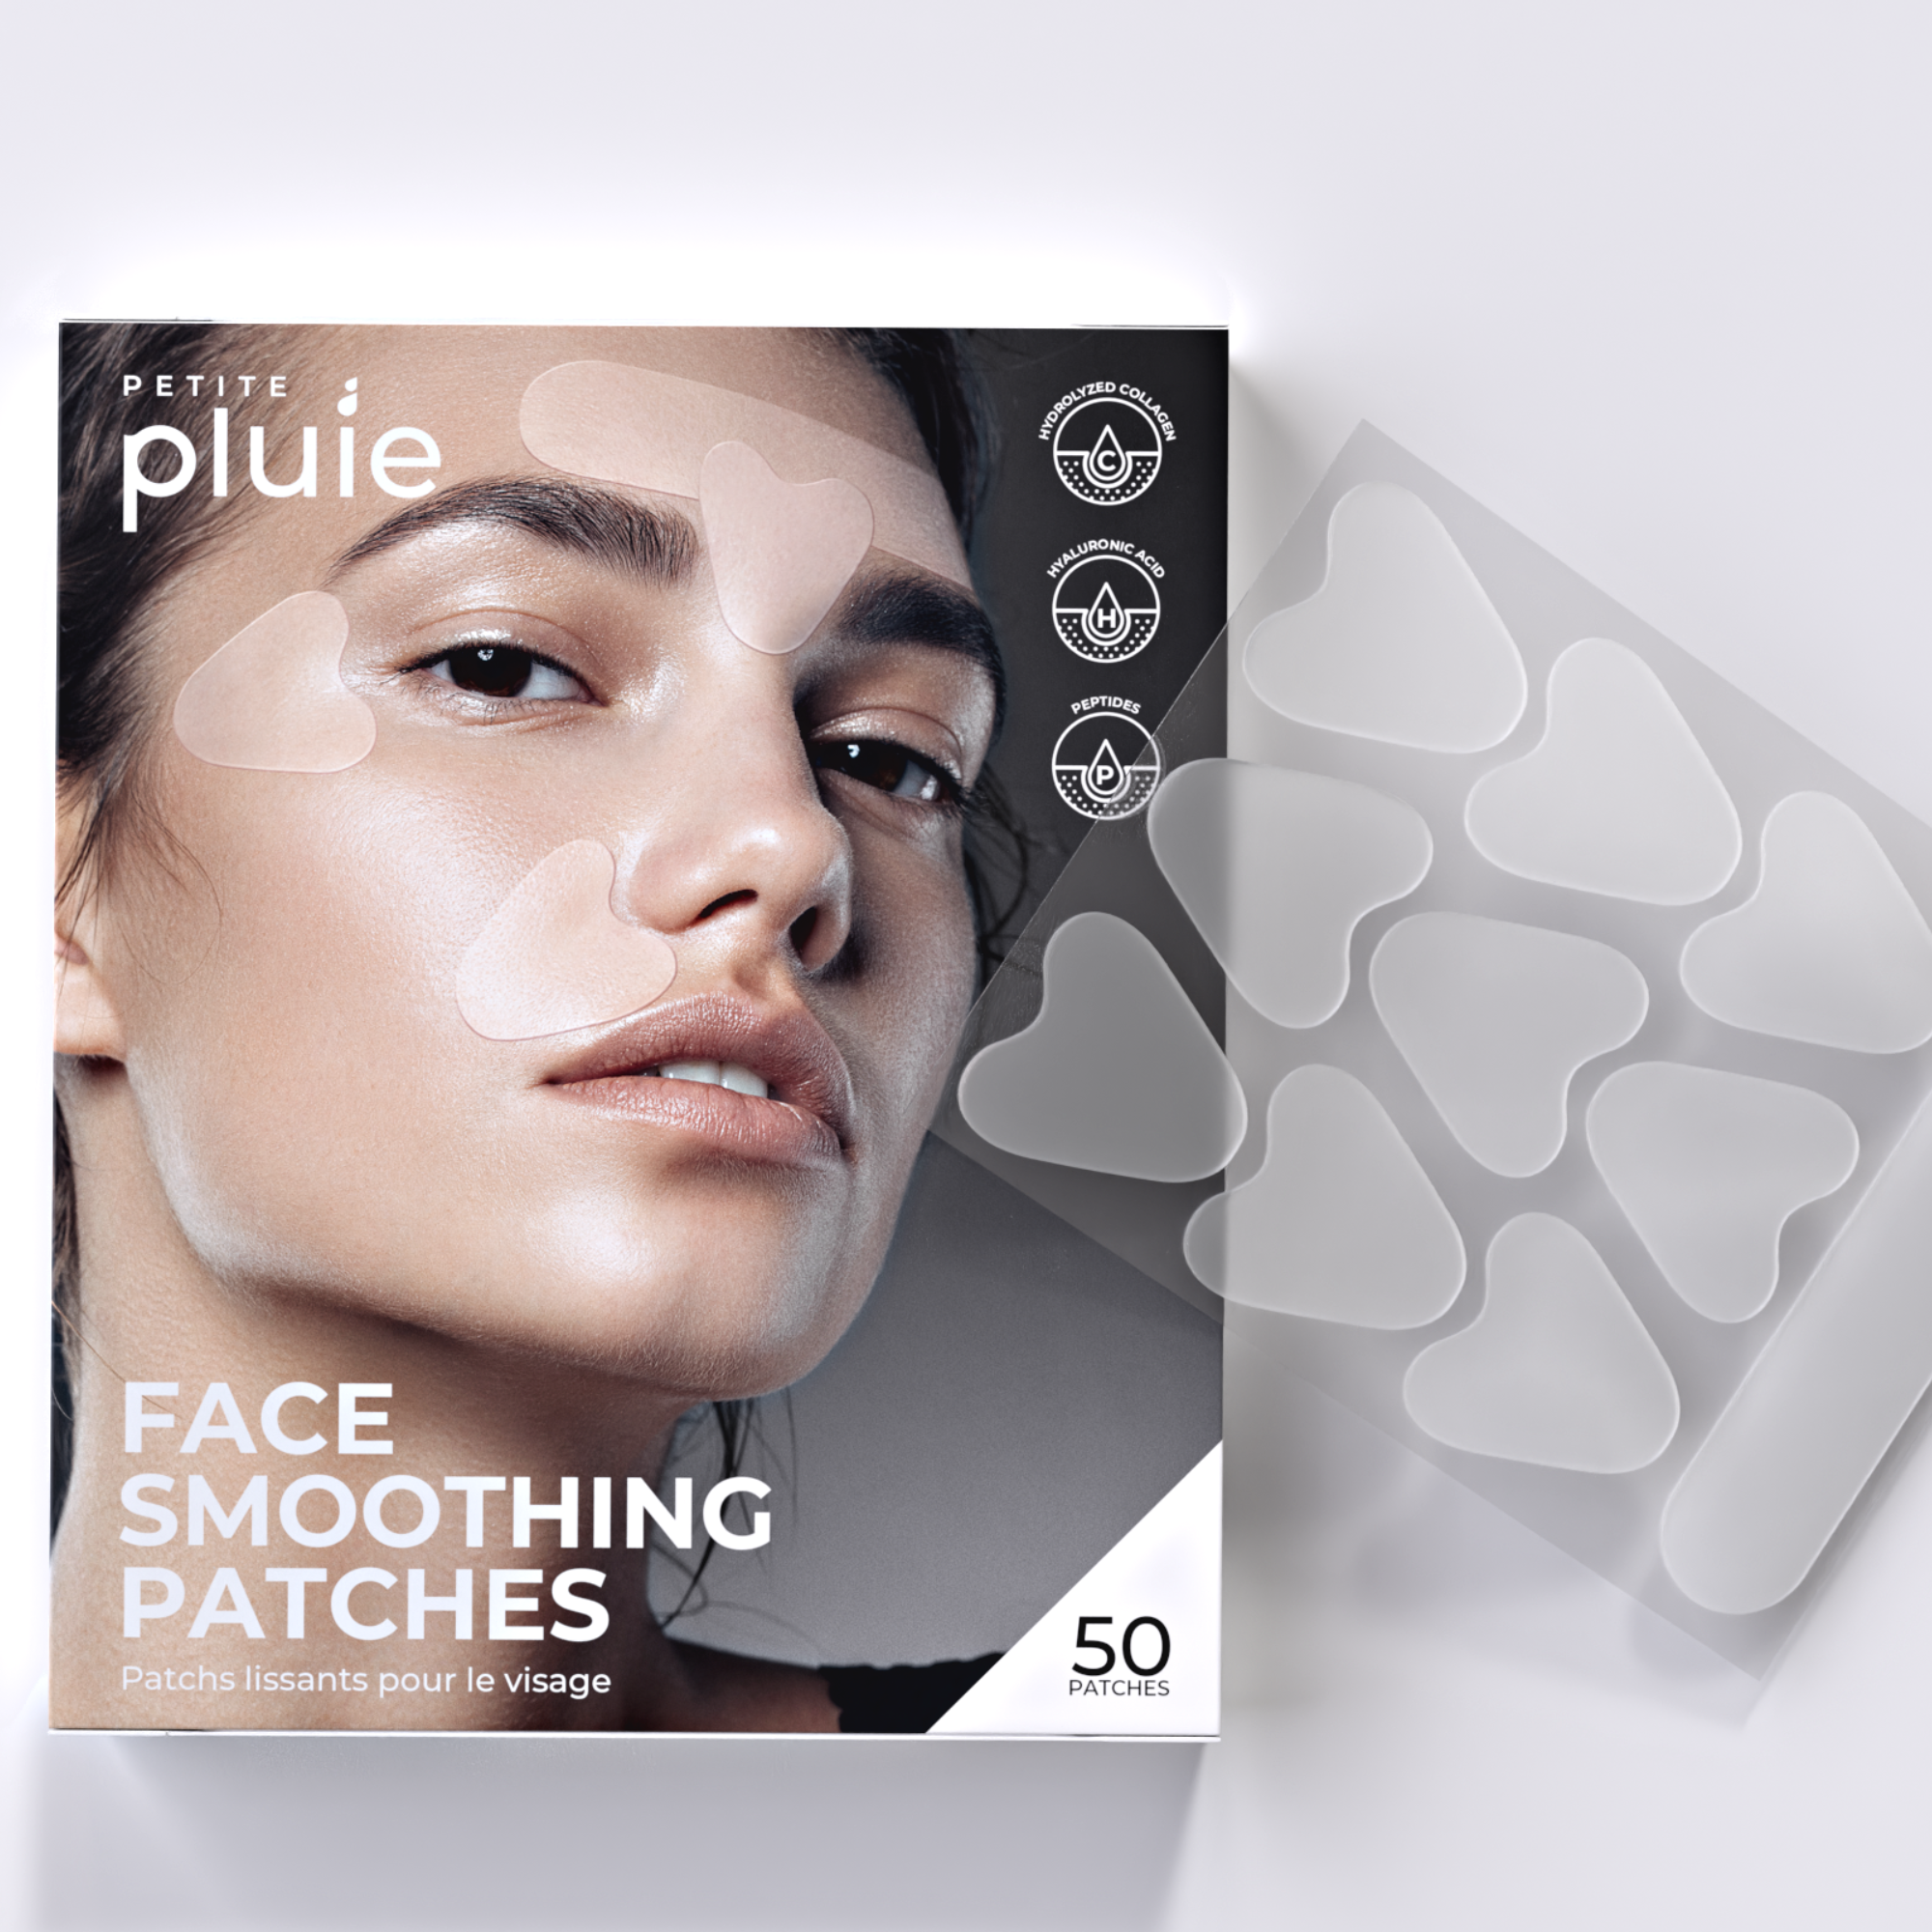 face smoothing patches Petite Pluie K Beauty